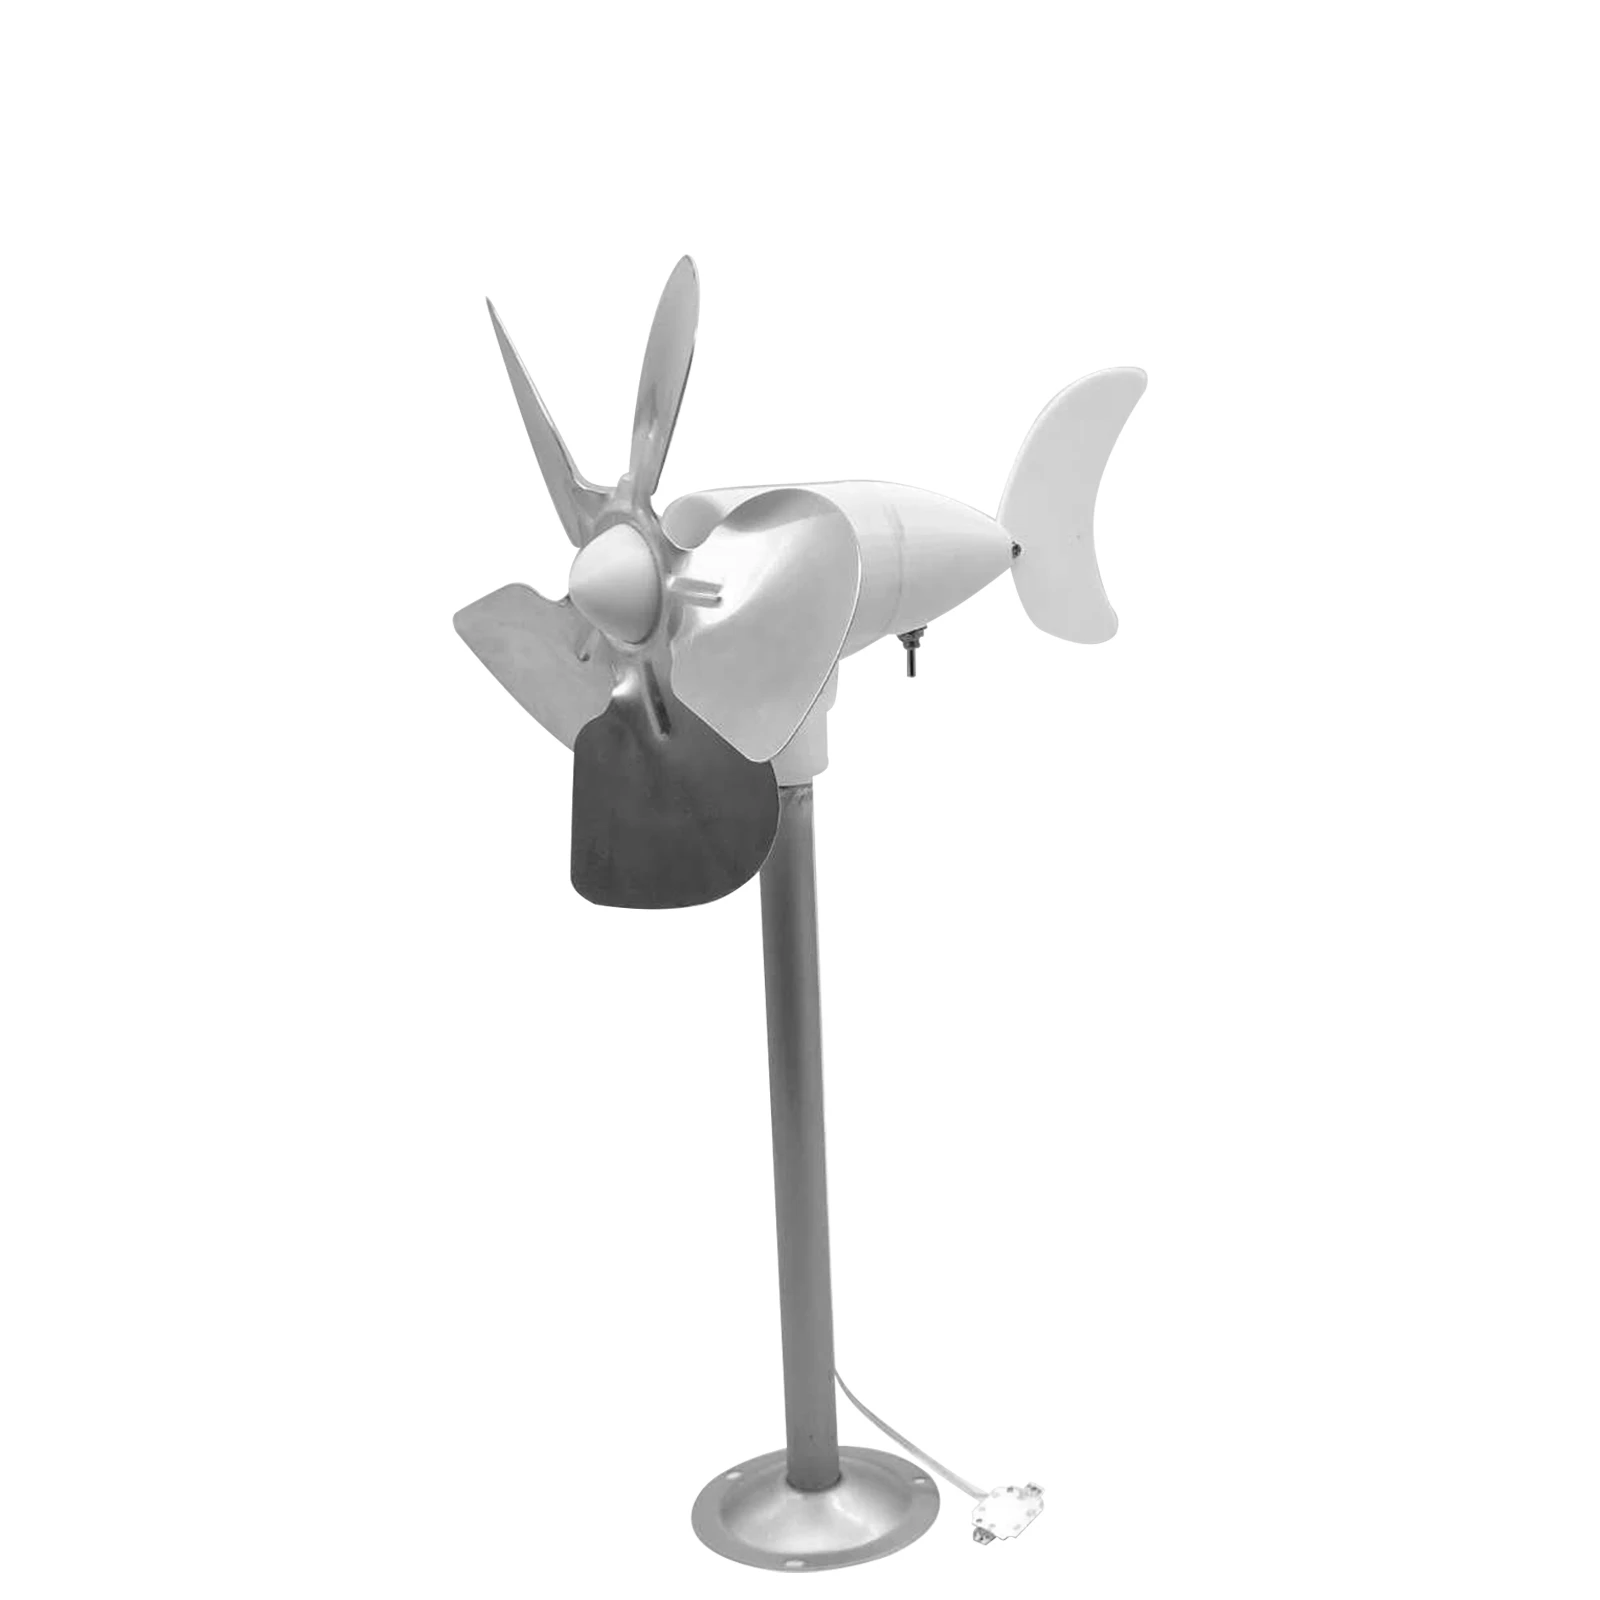 Details about  / New Micro Wind Turbine Brushless Three-Phase Permanent Magnet Model For Science